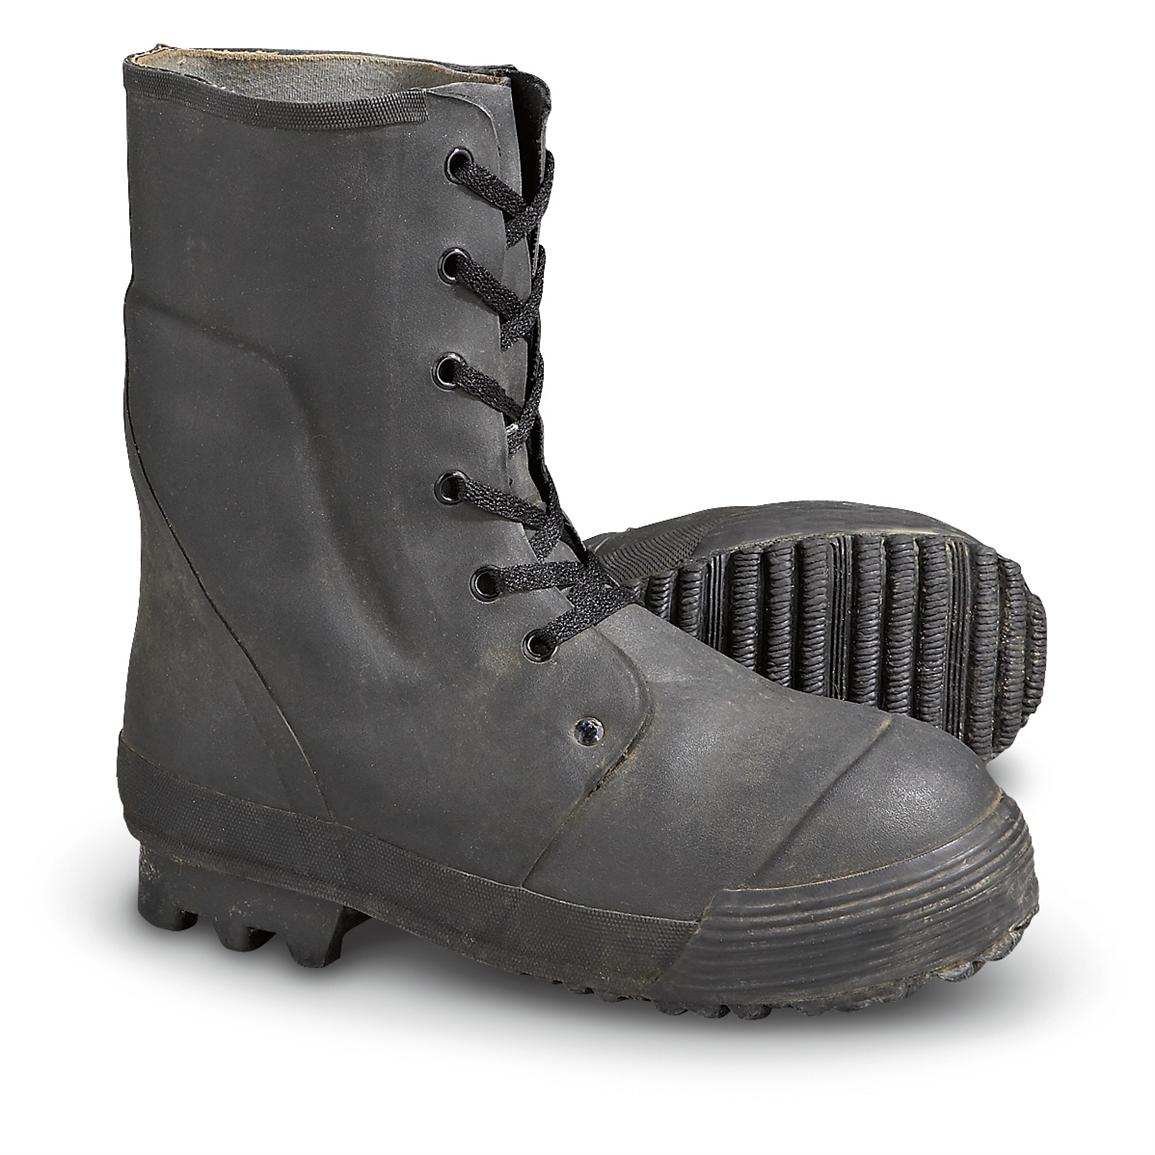 Used French Military Surplus Mickey Boots, Black - 219146, Military ...